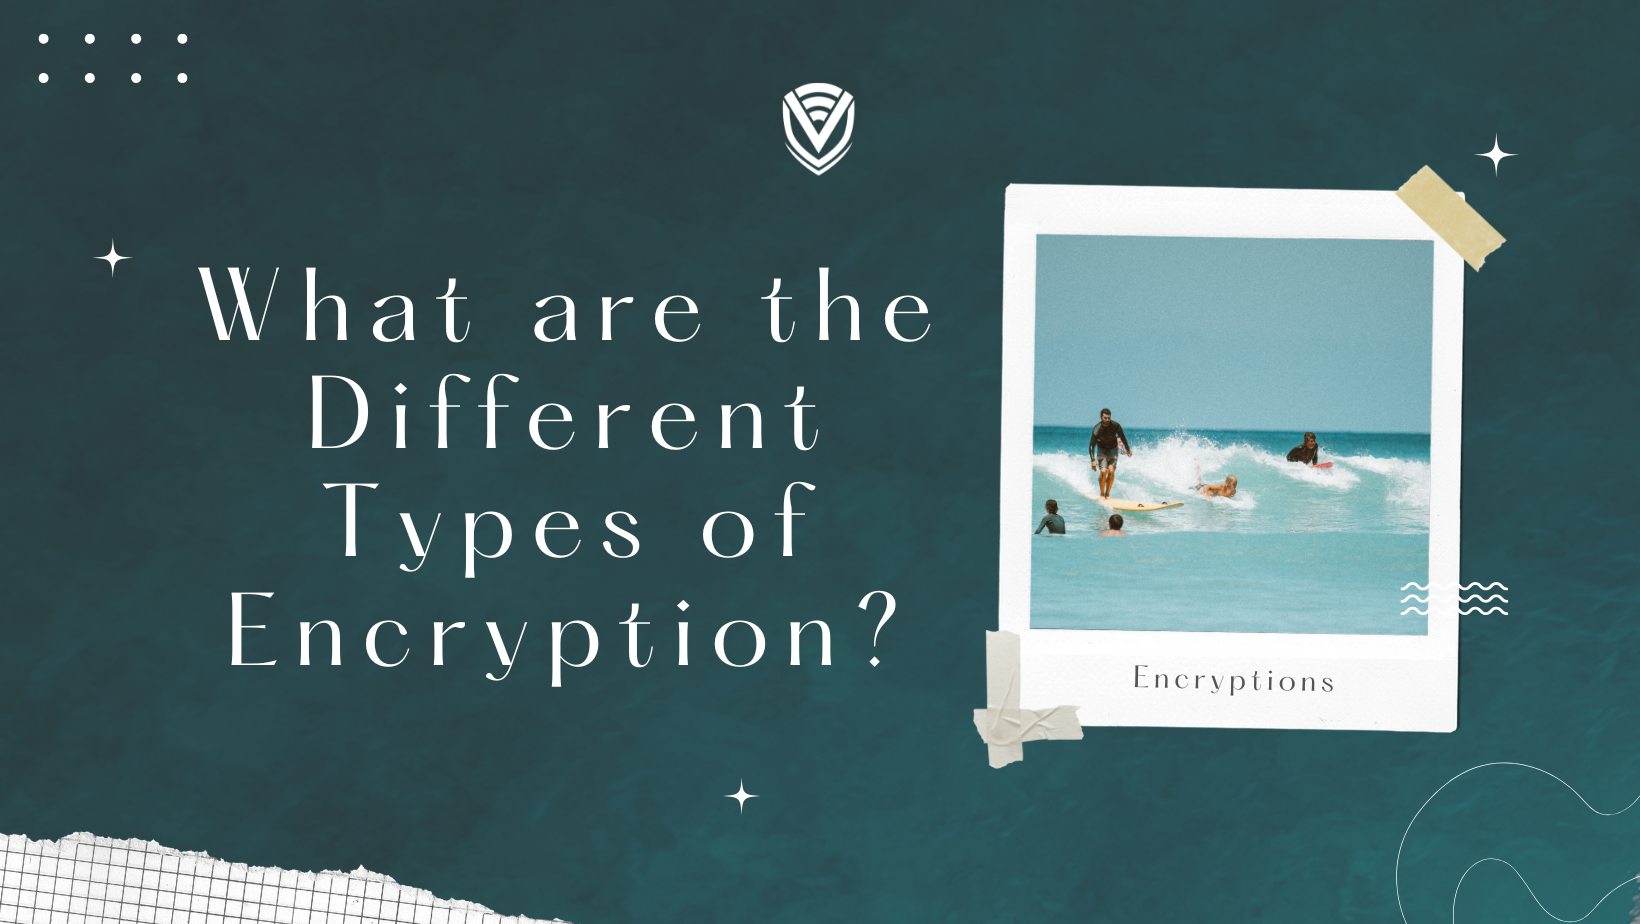 What are the Different Types of Encryption?